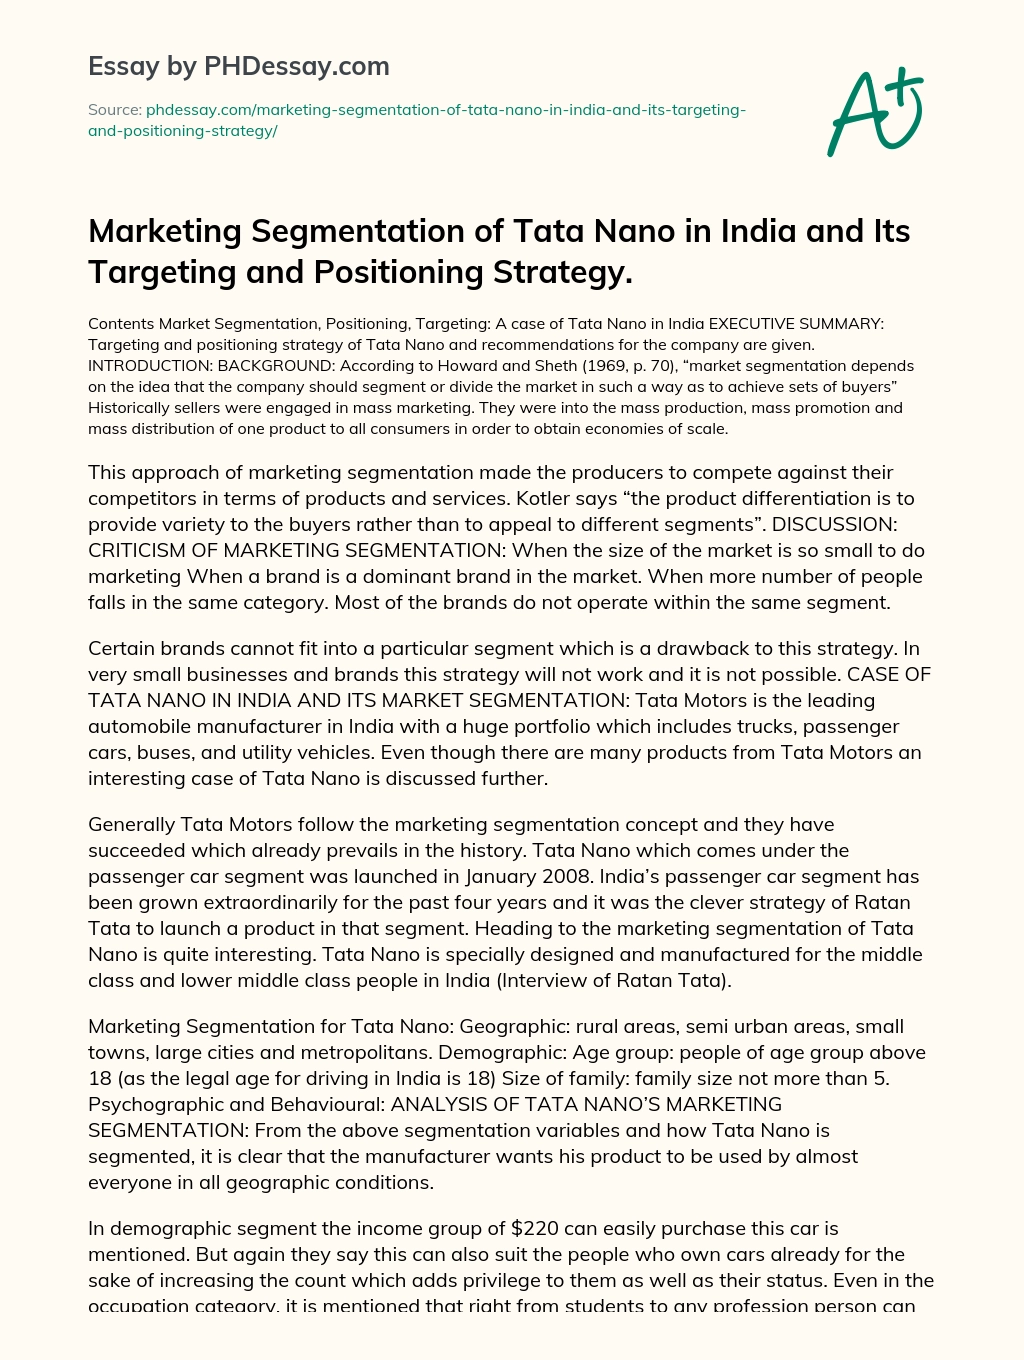 Marketing Segmentation of Tata Nano in India and Its Targeting and Positioning Strategy. essay